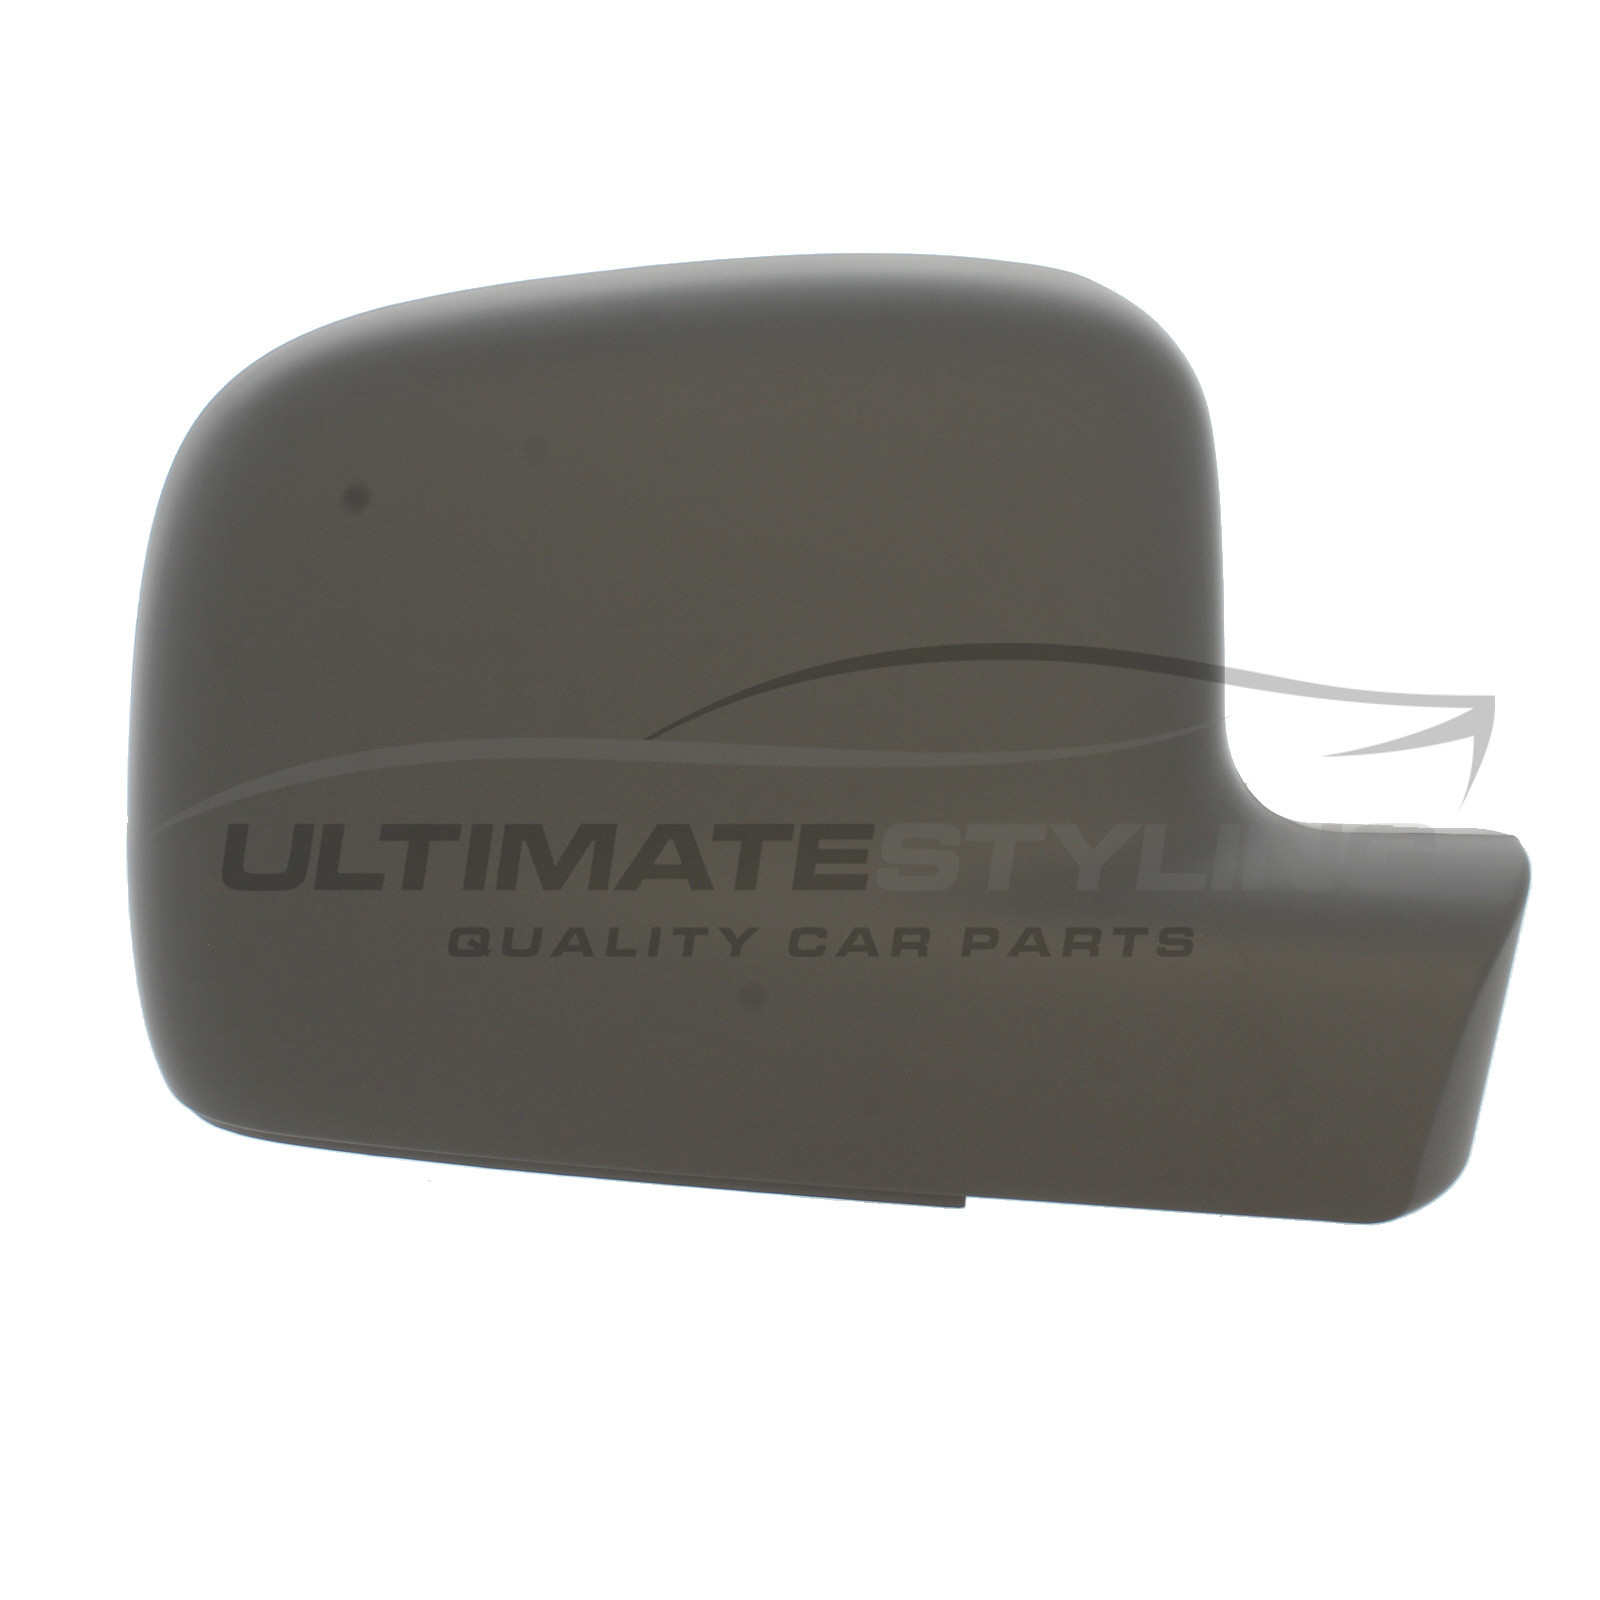 Volkswagen Passat 1997-2005, Volkswagen Caddy 2004-2021, Volkswagen  Caravelle 2003-2010 Wing Mirror Cover Cap Casing Primed Drivers Side (RH)